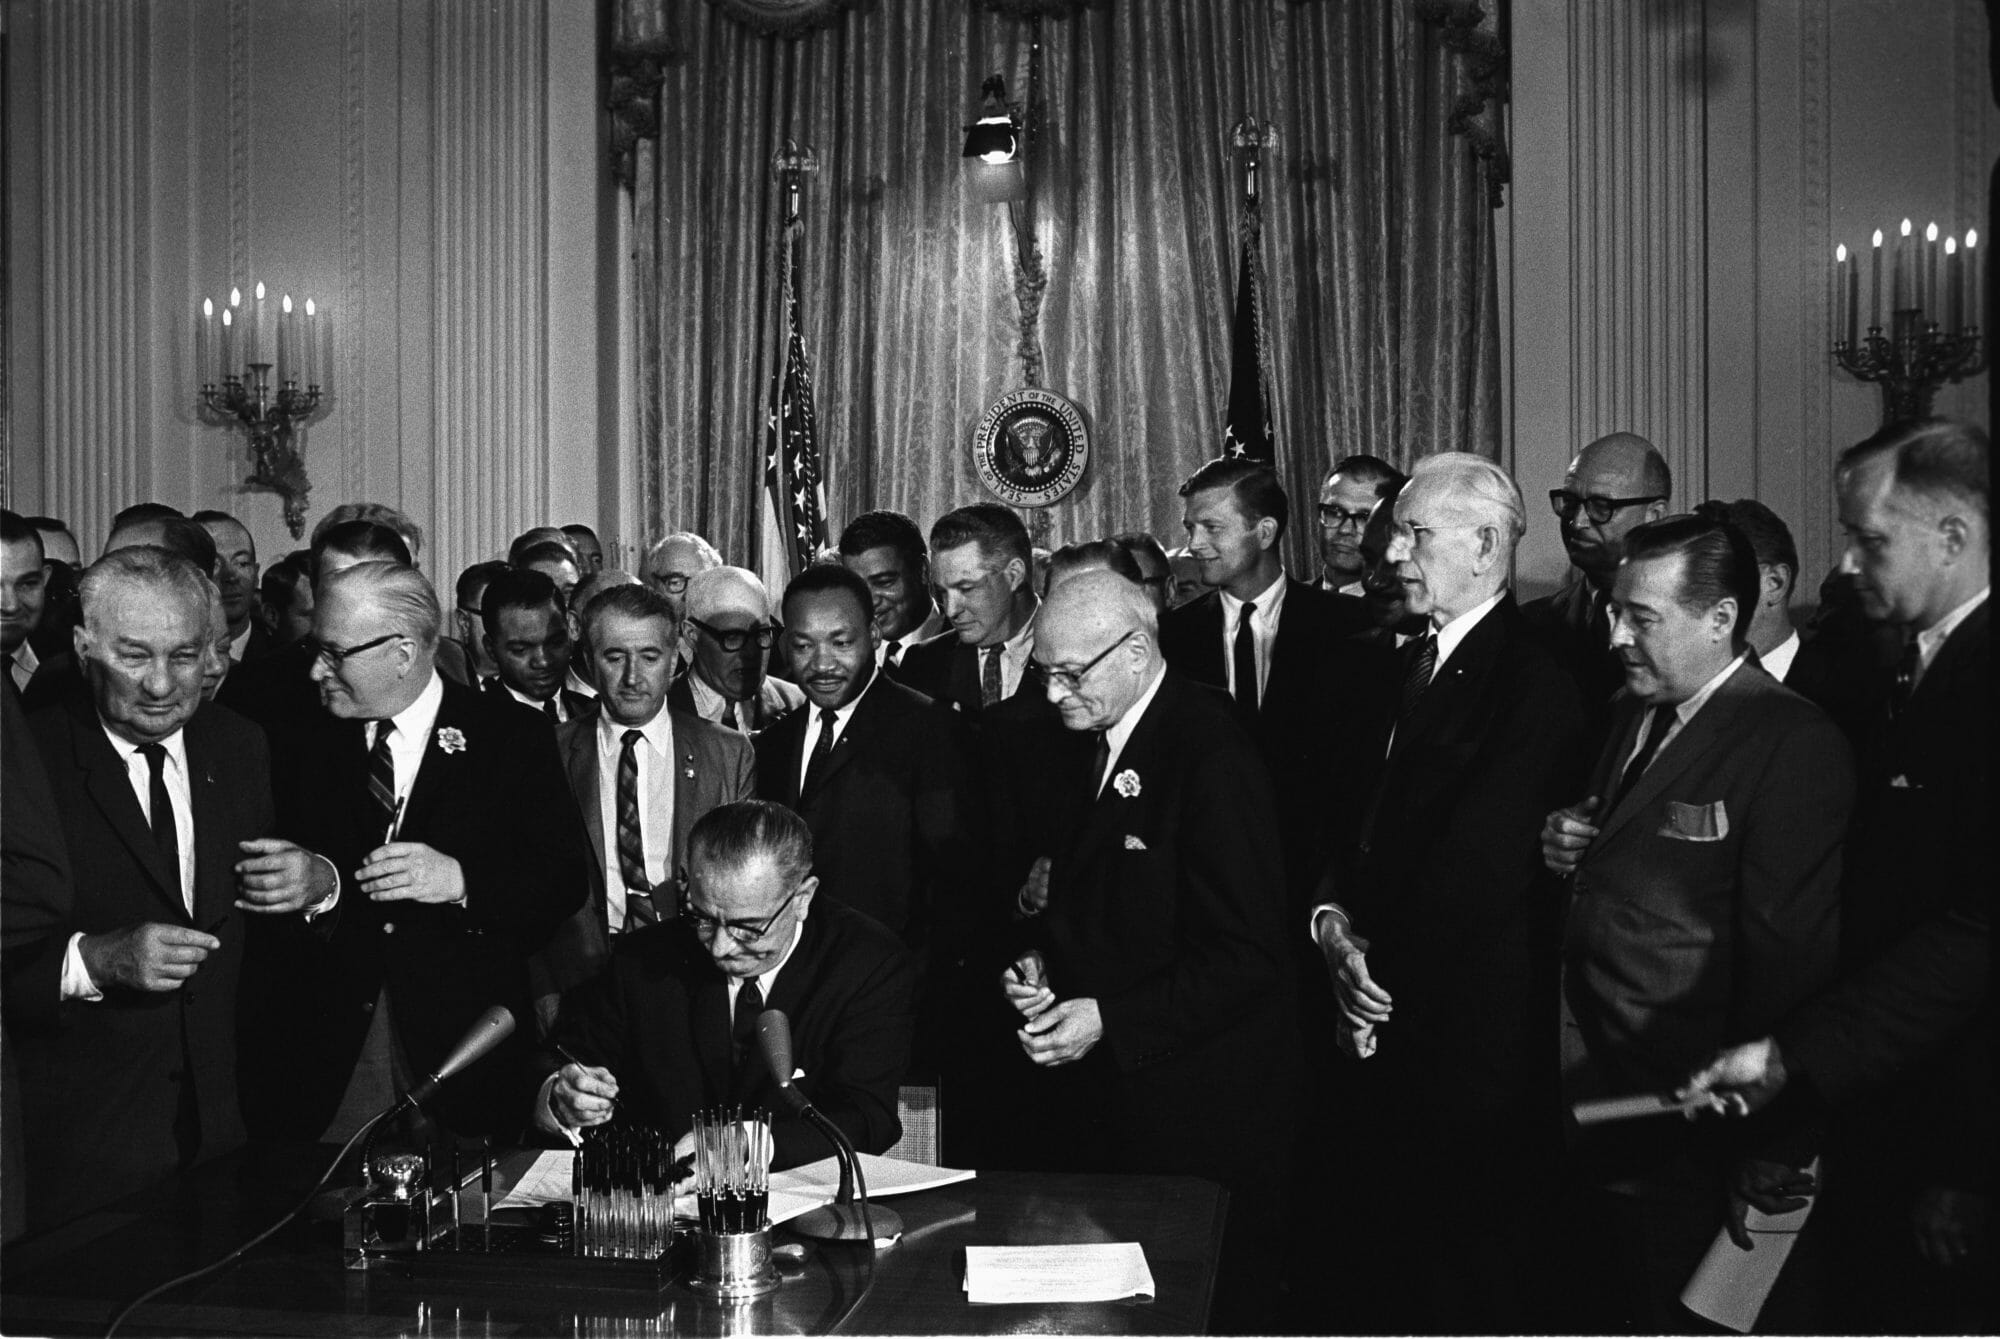 Cecil Stoughton, "President Lyndon B. Johnson signs the 1964 Civil Rights Act as Martin Luther King, Jr., and others, look on," Photograph, July 2, 1964. Wikimedia Commons, https://en.wikipedia.org/wiki/File:Lyndon_Johnson_signing_Civil_Rights_Act,_July_2,_1964.jpg. 